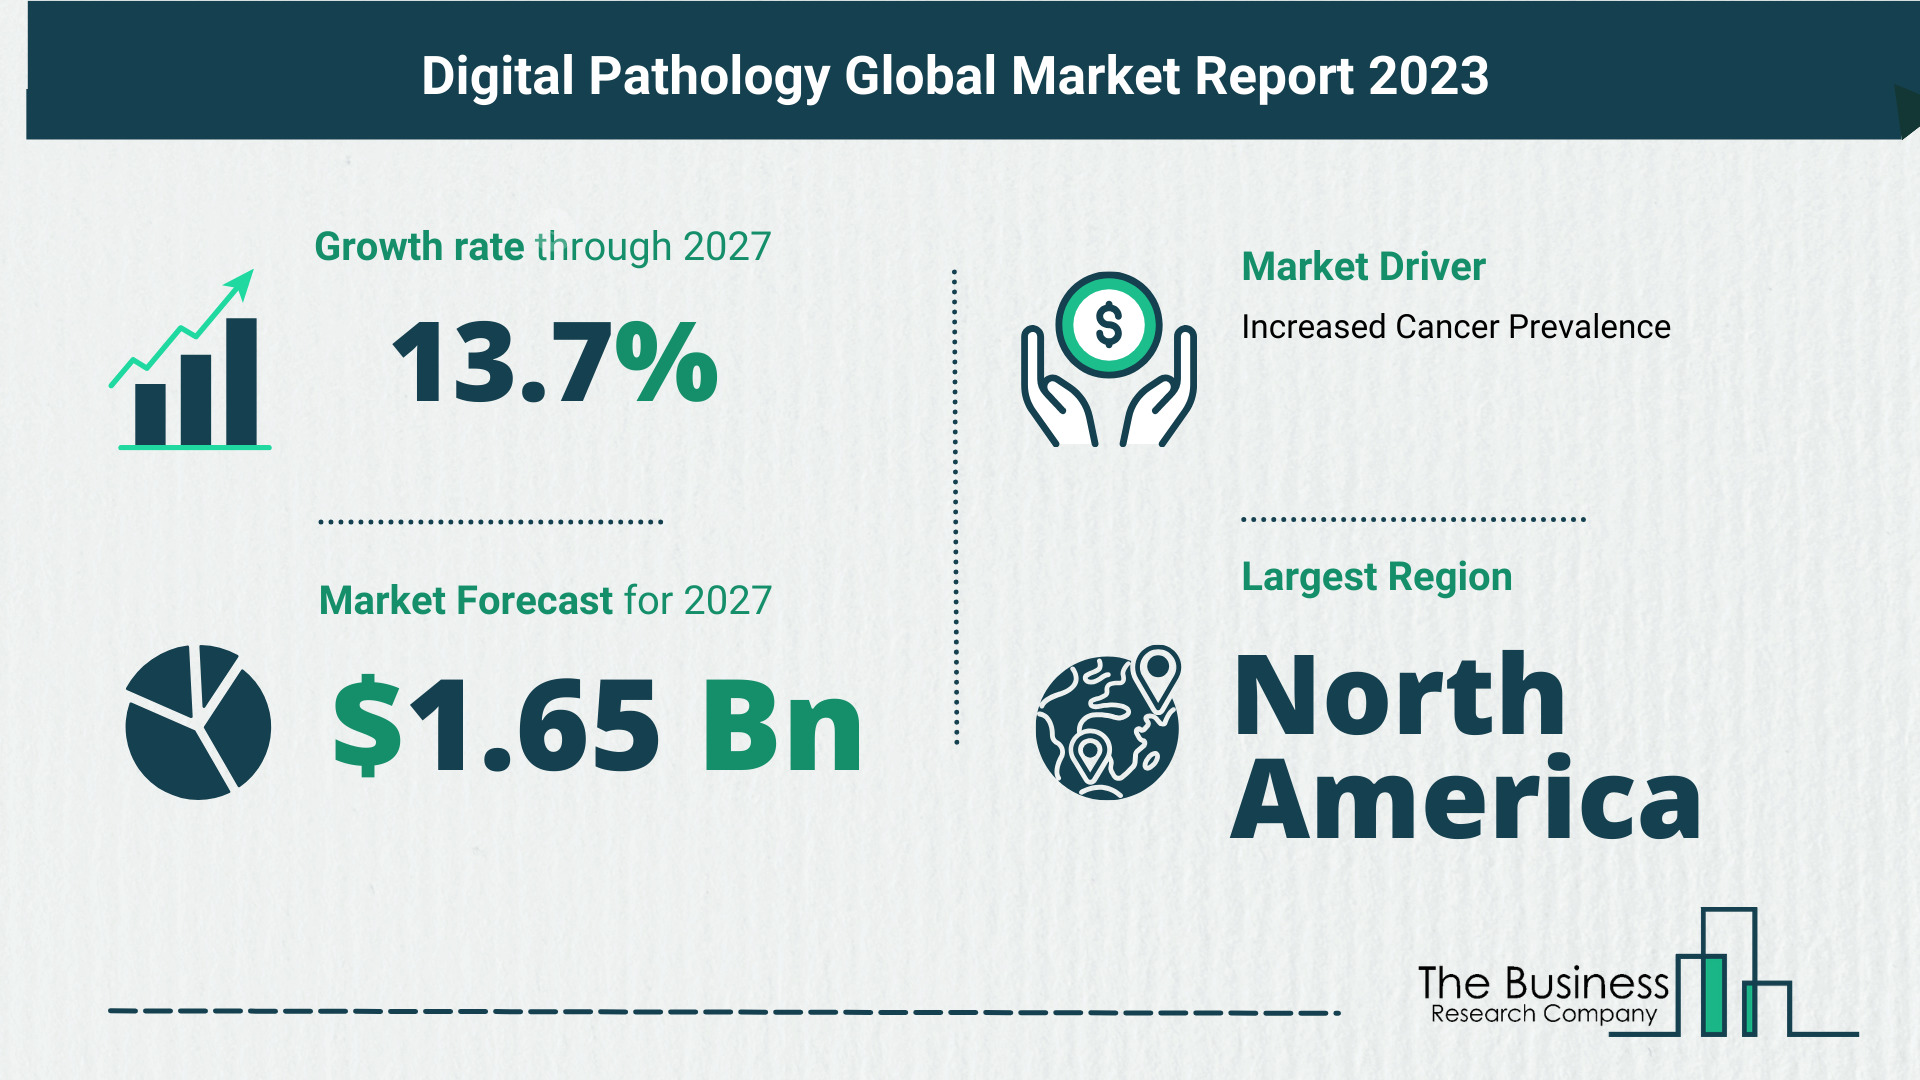 Key Trends And Drivers In The Digital Pathology Market 2023